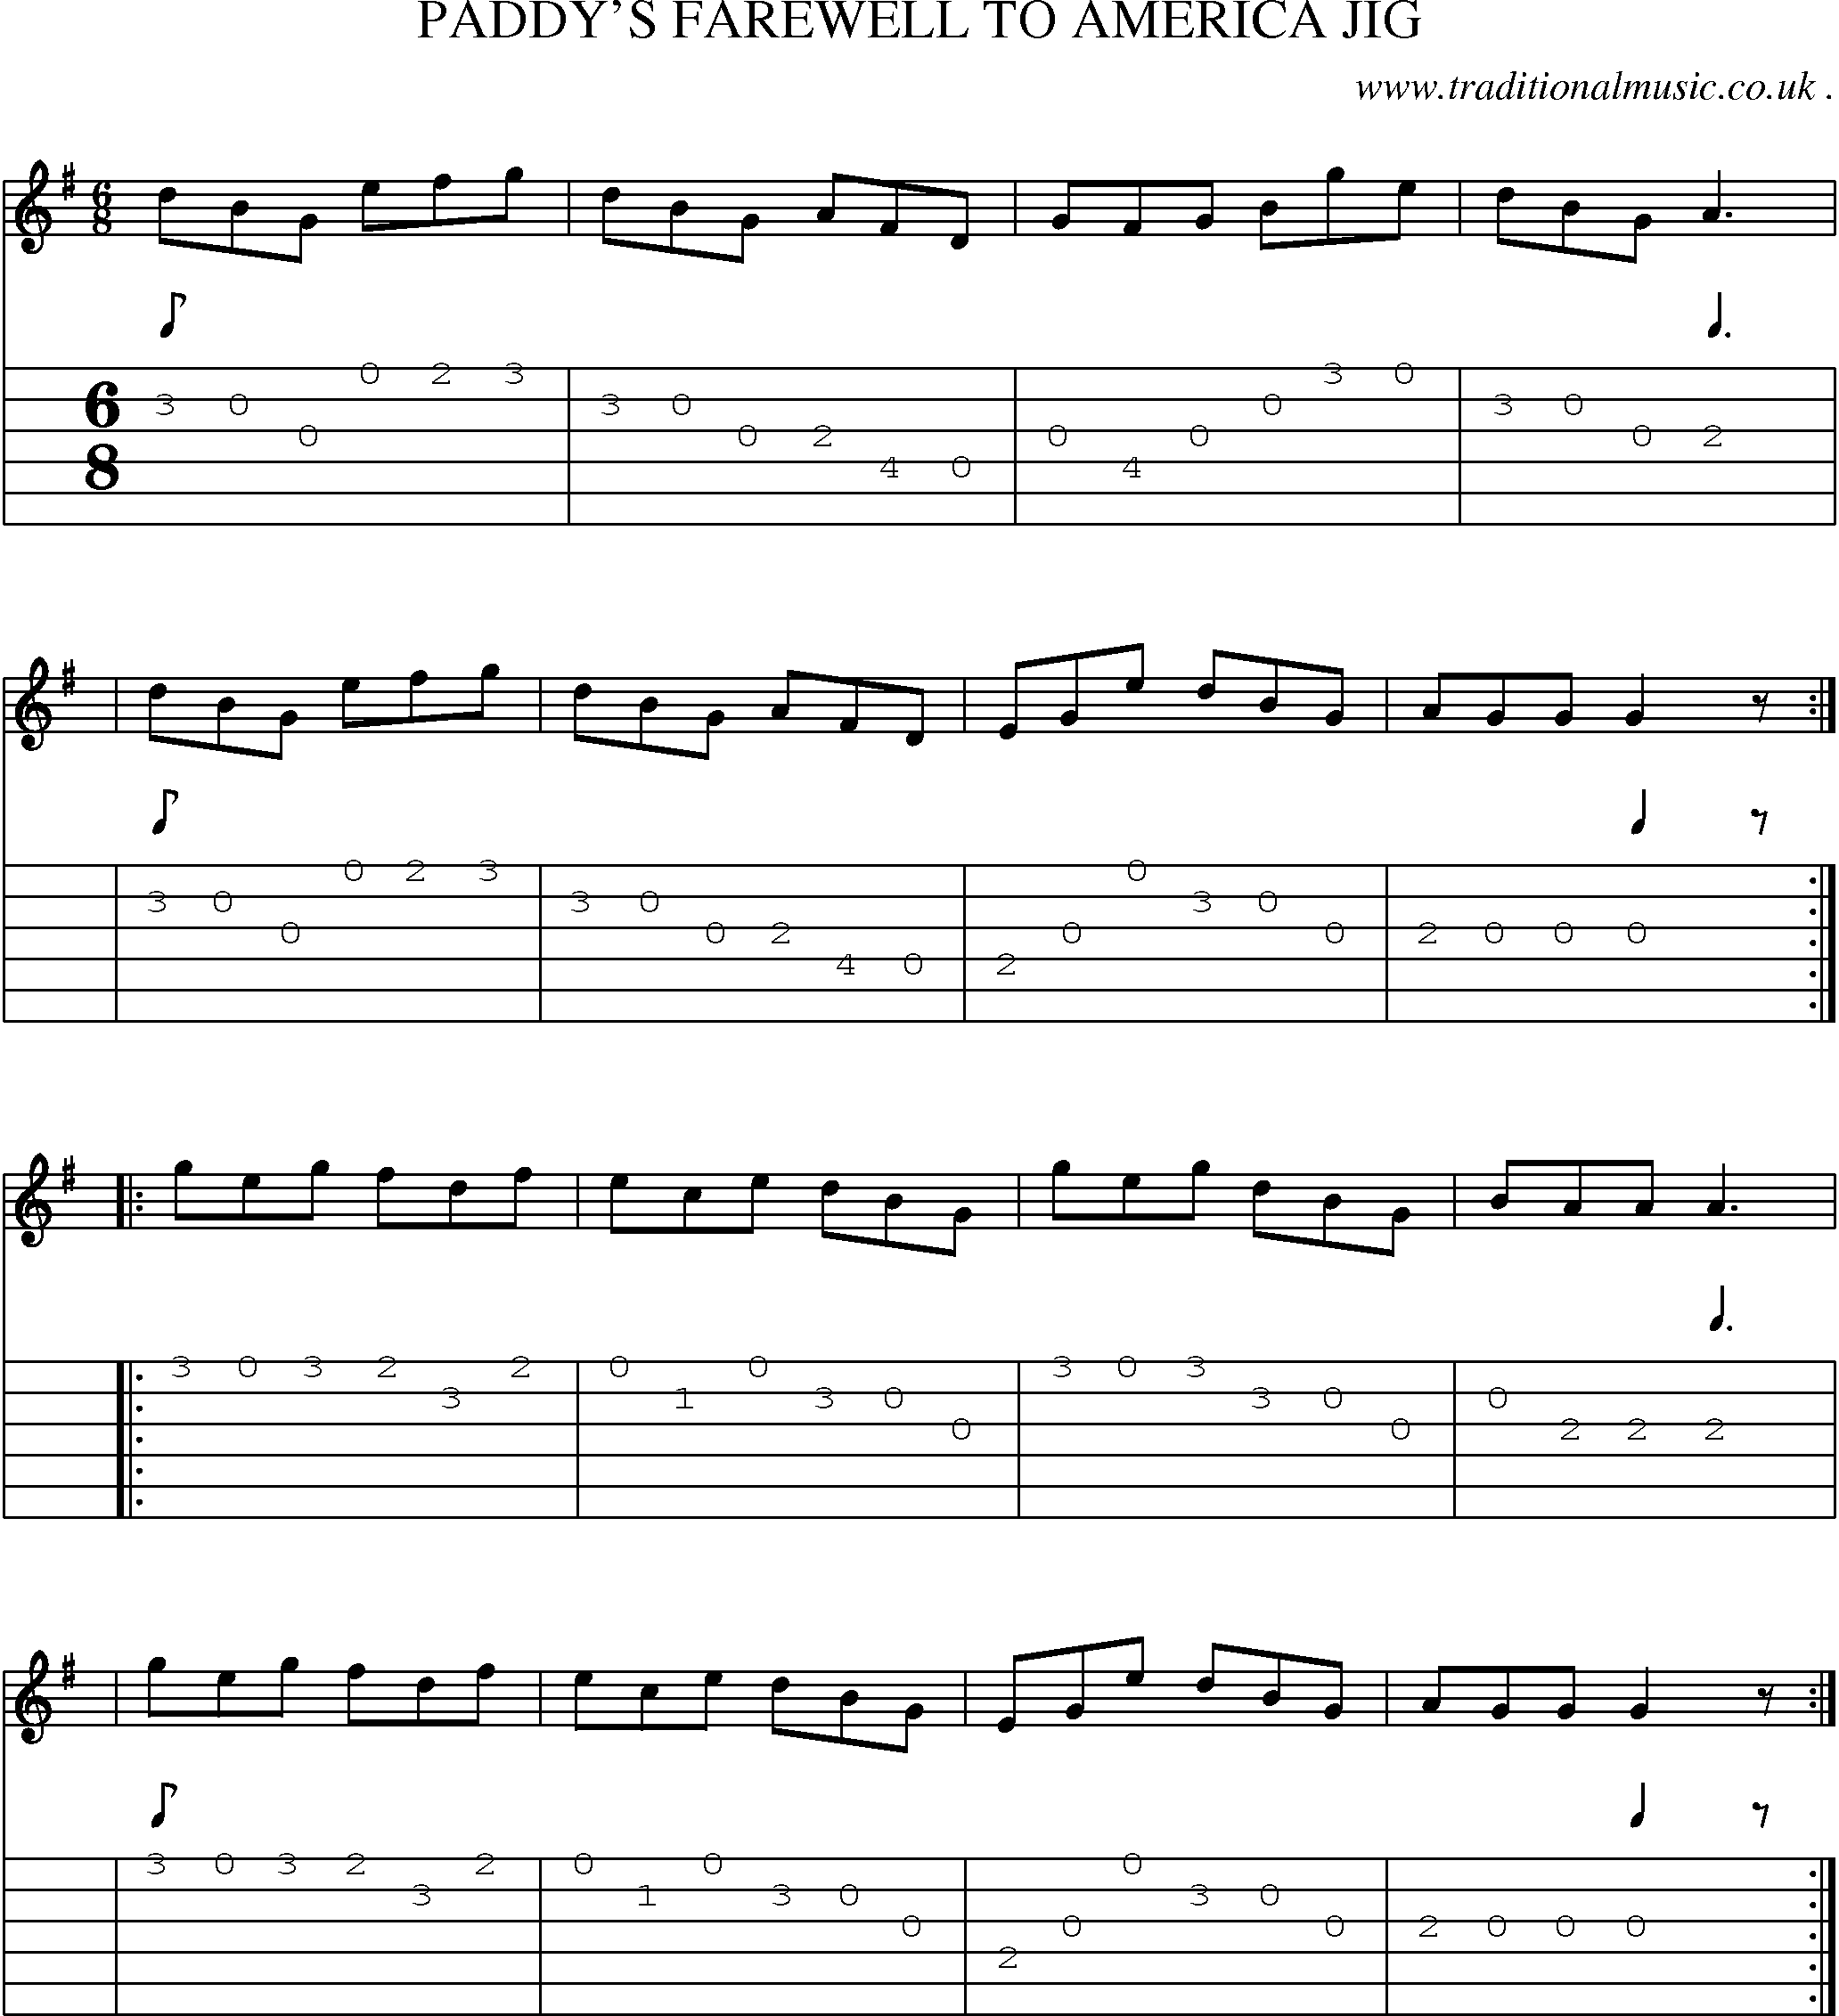 Sheet-Music and Guitar Tabs for Paddys Farewell To America Jig